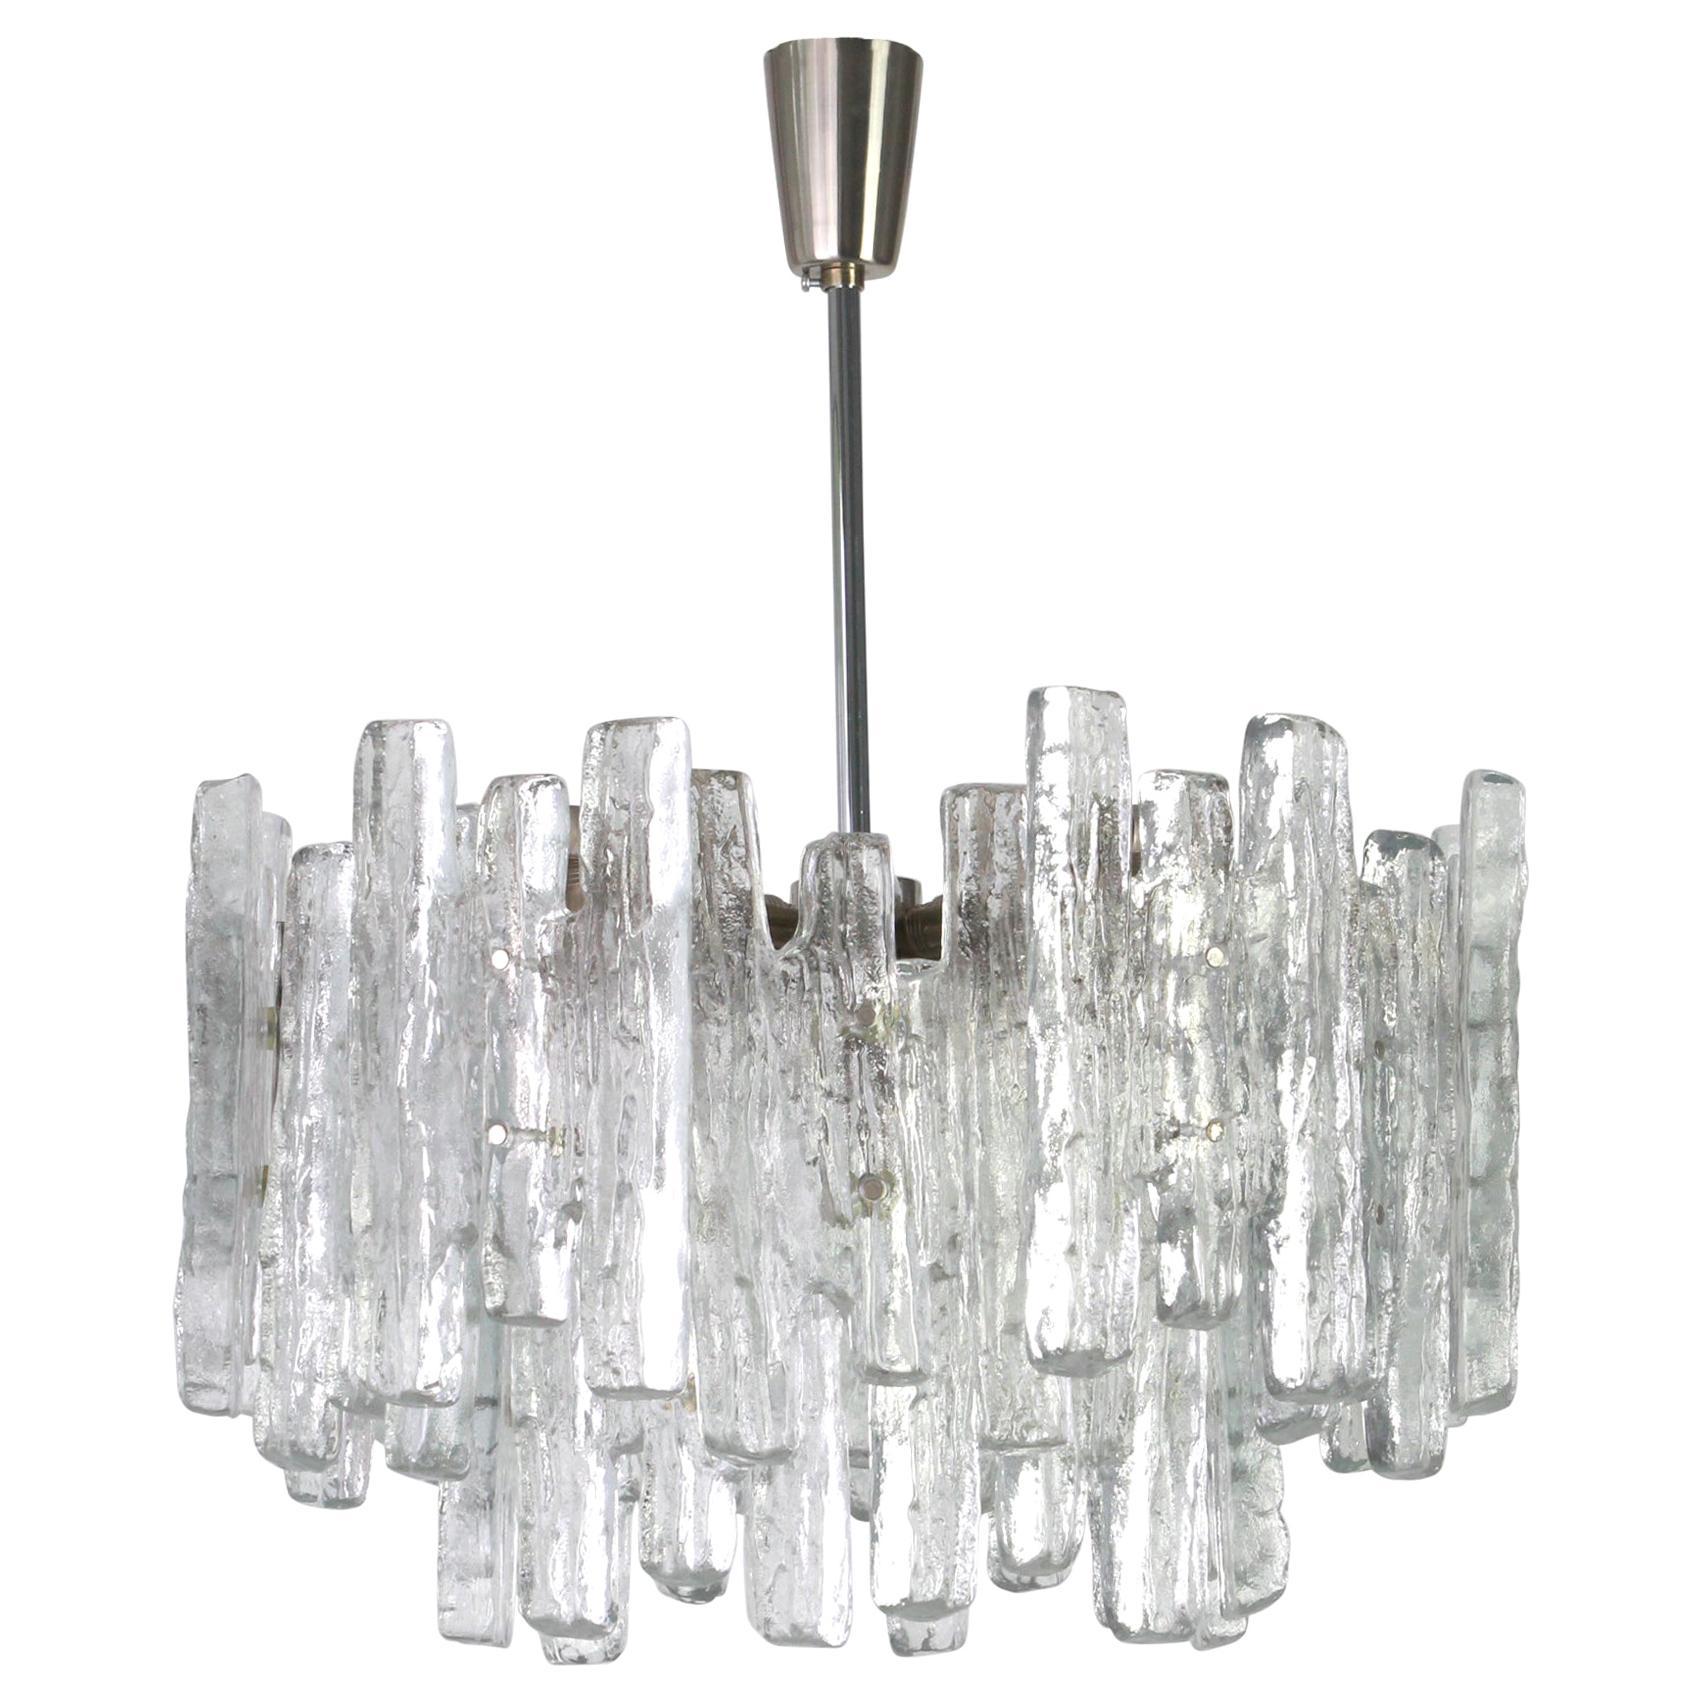 Mid-20th Century Set of 12 Murano Ice Glass Fixtures and Wall lights // Reserved for Joshua